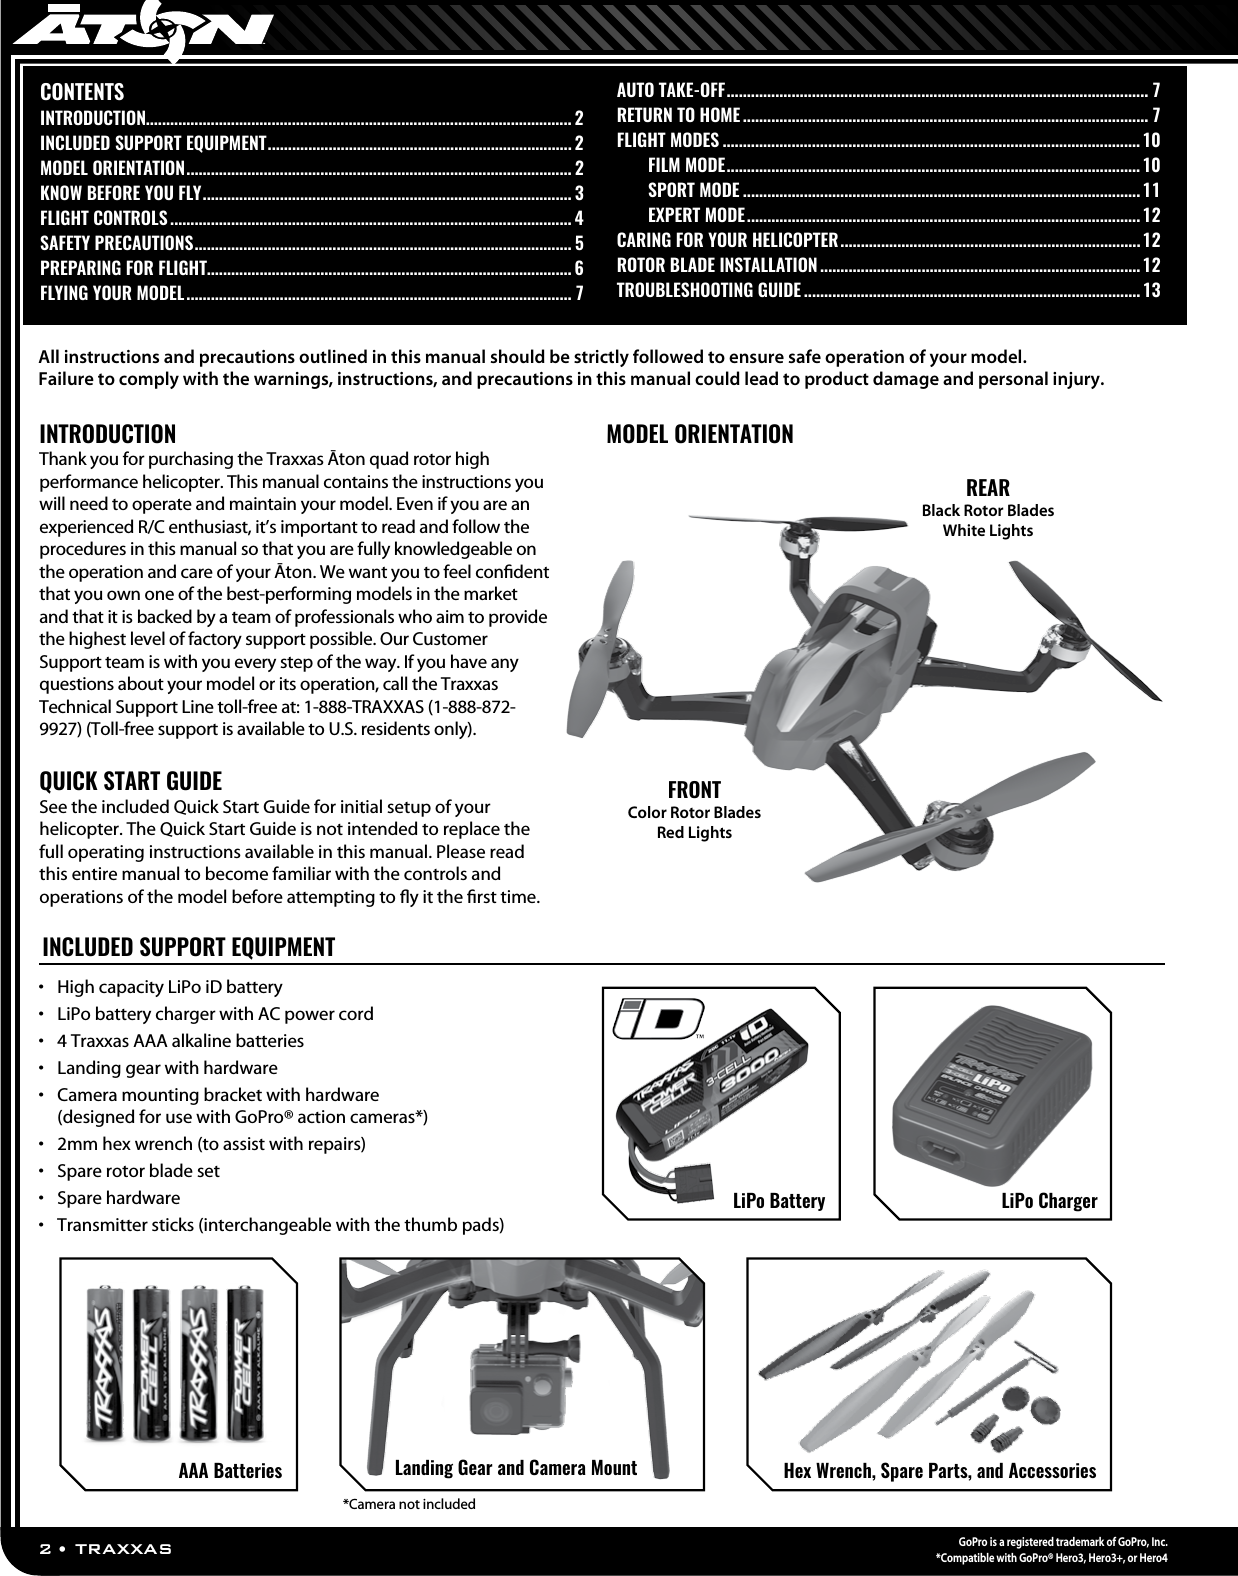 2 • TRAXXASGoPro is a registered trademark of GoPro, Inc.*Compatible with GoPro® Hero3, Hero3+, or Hero4INTRODUCTIONThank you for purchasing the Traxxas Āton quad rotor high performance helicopter. This manual contains the instructions you will need to operate and maintain your model. Even if you are an experienced R/C enthusiast, it’s important to read and follow the procedures in this manual so that you are fully knowledgeable on the operation and care of your Āton. We want you to feel conﬁdent that you own one of the best-performing models in the market and that it is backed by a team of professionals who aim to provide the highest level of factory support possible. Our Customer Support team is with you every step of the way. If you have any questions about your model or its operation, call the Traxxas Technical Support Line toll-free at: 1-888-TRAXXAS (1-888-872-9927) (Toll-free support is available to U.S. residents only). QUICK START GUIDESee the included Quick Start Guide for initial setup of your helicopter. The Quick Start Guide is not intended to replace the full operating instructions available in this manual. Please read this entire manual to become familiar with the controls and operations of the model before attempting to ﬂy it the ﬁrst time.CONTENTSINTRODUCTION......................................................................................................... 2INCLUDED SUPPORT EQUIPMENT ........................................................................... 2MODEL ORIENTATION ............................................................................................... 2KNOW BEFORE YOU FLY ........................................................................................... 3FLIGHT CONTROLS ................................................................................................... 4SAFETY PRECAUTIONS ............................................................................................. 5PREPARING FOR FLIGHT..........................................................................................6FLYING YOUR MODEL ............................................................................................... 7AUTO TAKE-OFF ........................................................................................................ 7RETURN TO HOME .................................................................................................... 7FLIGHT MODES .......................................................................................................10  FILM MODE ......................................................................................................10  SPORT MODE ..................................................................................................11  EXPERT MODE ................................................................................................. 12 CARING FOR YOUR HELICOPTER .......................................................................... 12ROTOR BLADE INSTALLATION ...............................................................................12TROUBLESHOOTING GUIDE ...................................................................................13MODEL ORIENTATIONREARBlack Rotor BladesWhite LightsFRONTColor Rotor BladesRed Lights•  High capacity LiPo iD battery•  LiPo battery charger with AC power cord•  4 Traxxas AAA alkaline batteries•  Landing gear with hardware•  Camera mounting bracket with hardware  (designed for use with GoPro® action cameras*)•  2mm hex wrench (to assist with repairs)•  Spare rotor blade set•  Spare hardware•  Transmitter sticks (interchangeable with the thumb pads)*Camera not includedAll instructions and precautions outlined in this manual should be strictly followed to ensure safe operation of your model.  Failure to comply with the warnings, instructions, and precautions in this manual could lead to product damage and personal injury. INCLUDED SUPPORT EQUIPMENTLiPo BatteryAAA Batteries Hex Wrench, Spare Parts, and AccessoriesLanding Gear and Camera MountLiPo Charger